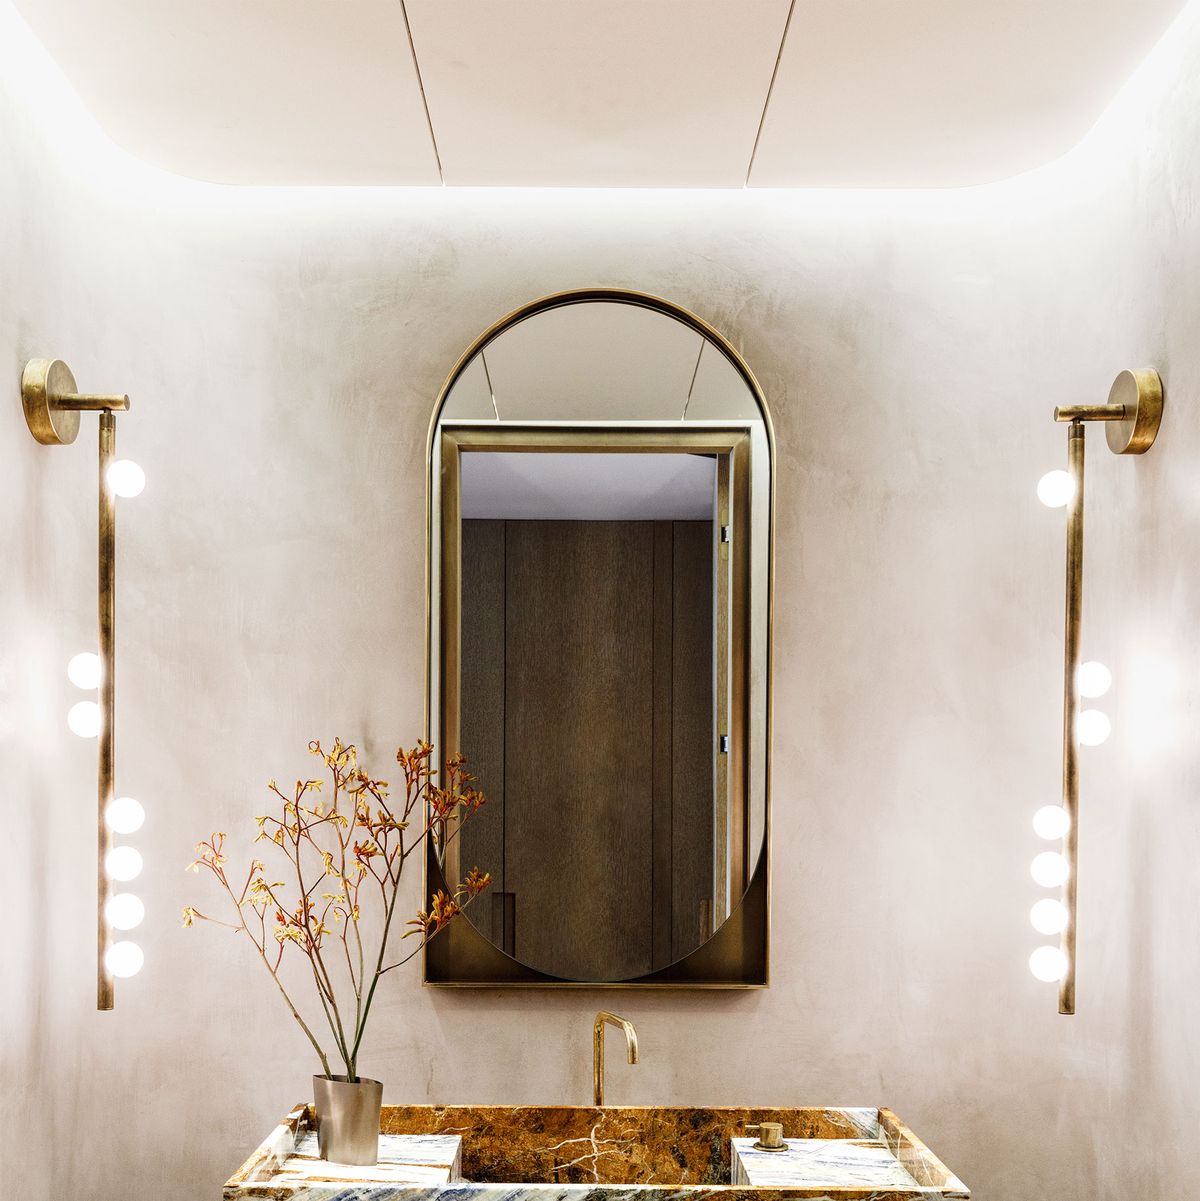 Luxurious Bathrooms and Spas  Get Inspired by Interior Design